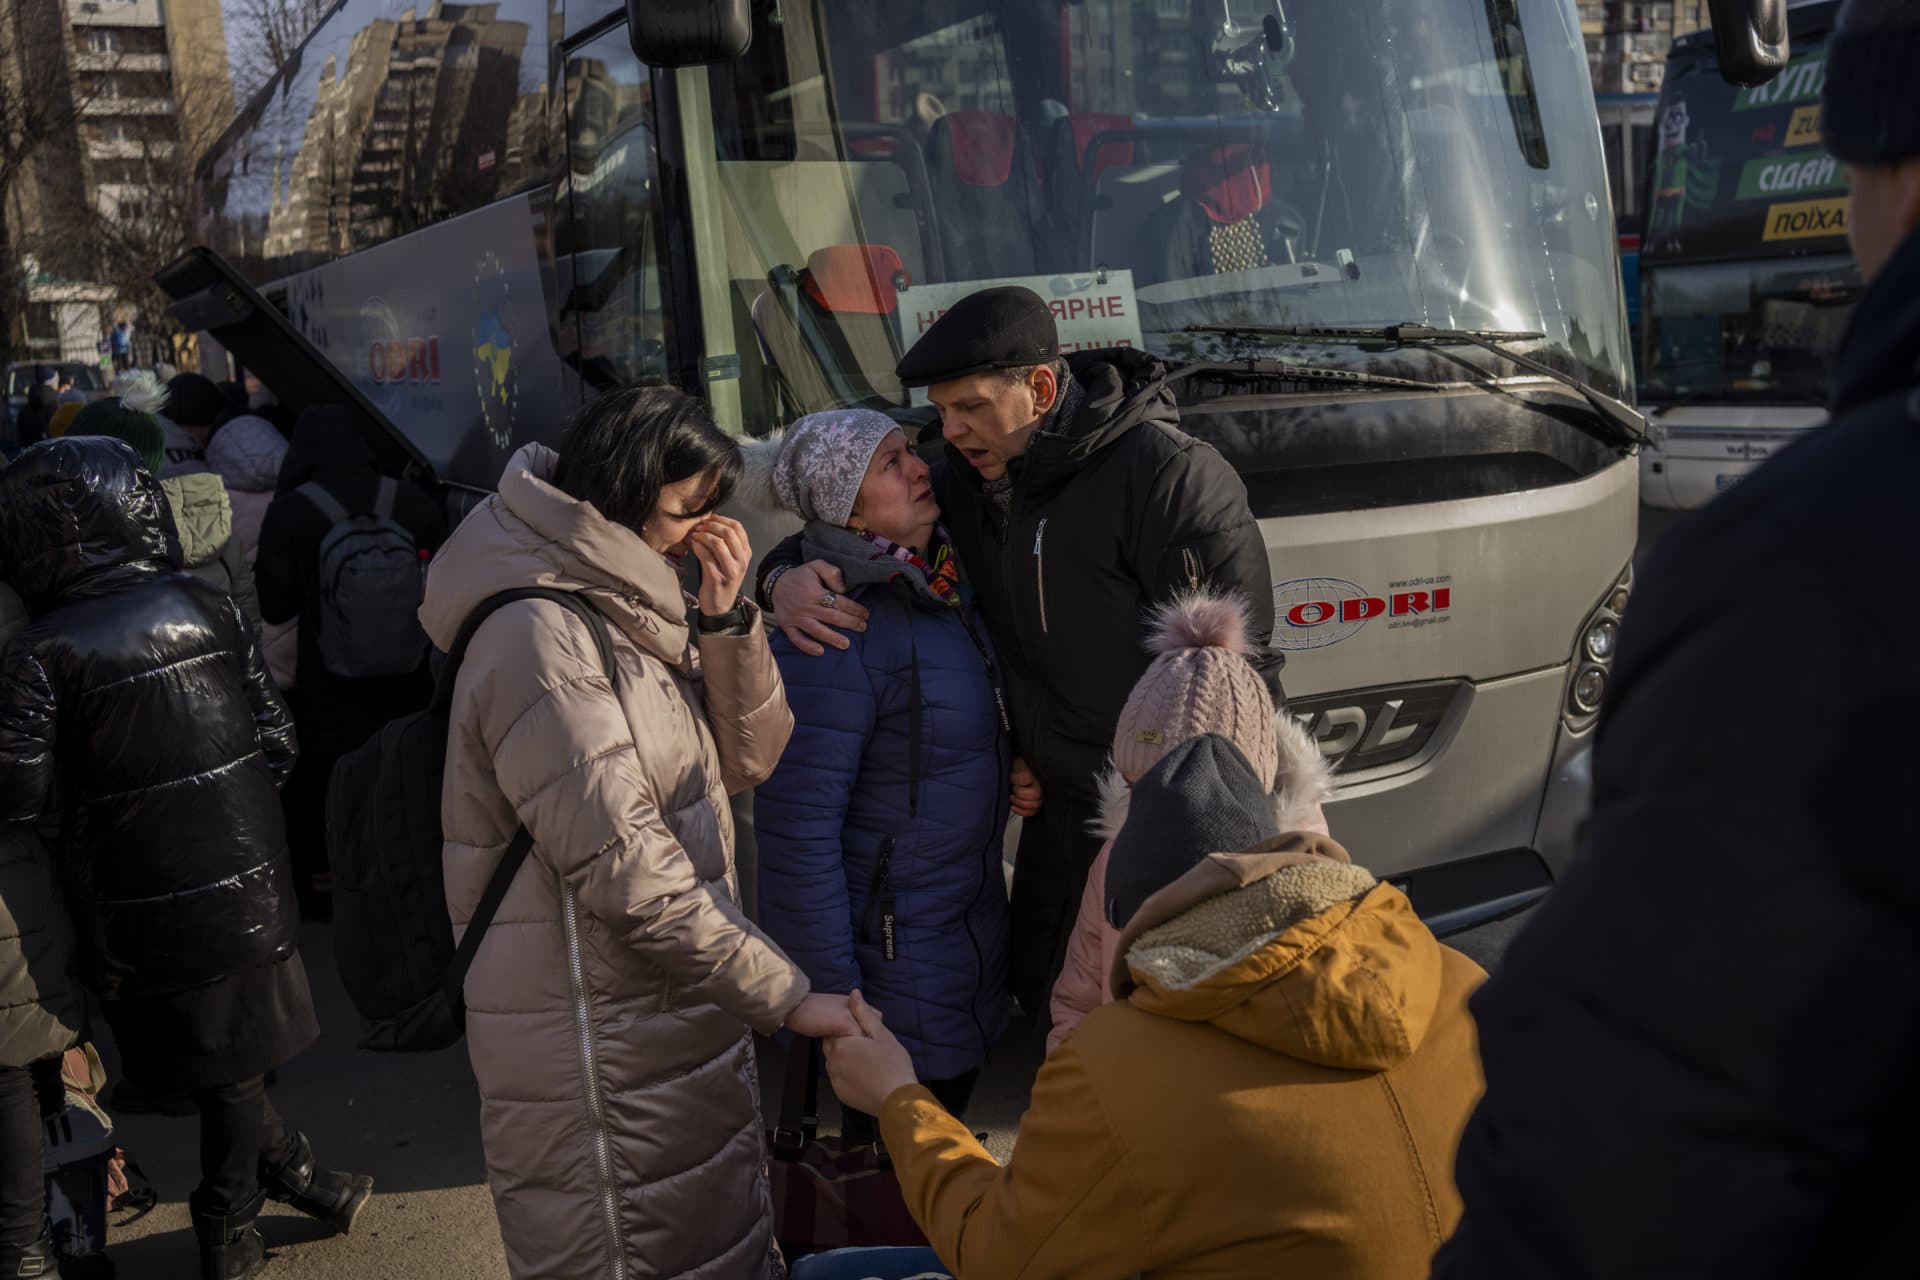 Ukrainian families say goodbye as they prepare to board a bus to Poland at Lviv bus main station, western Ukraine on March 1. (Bernat Armangue/AP)